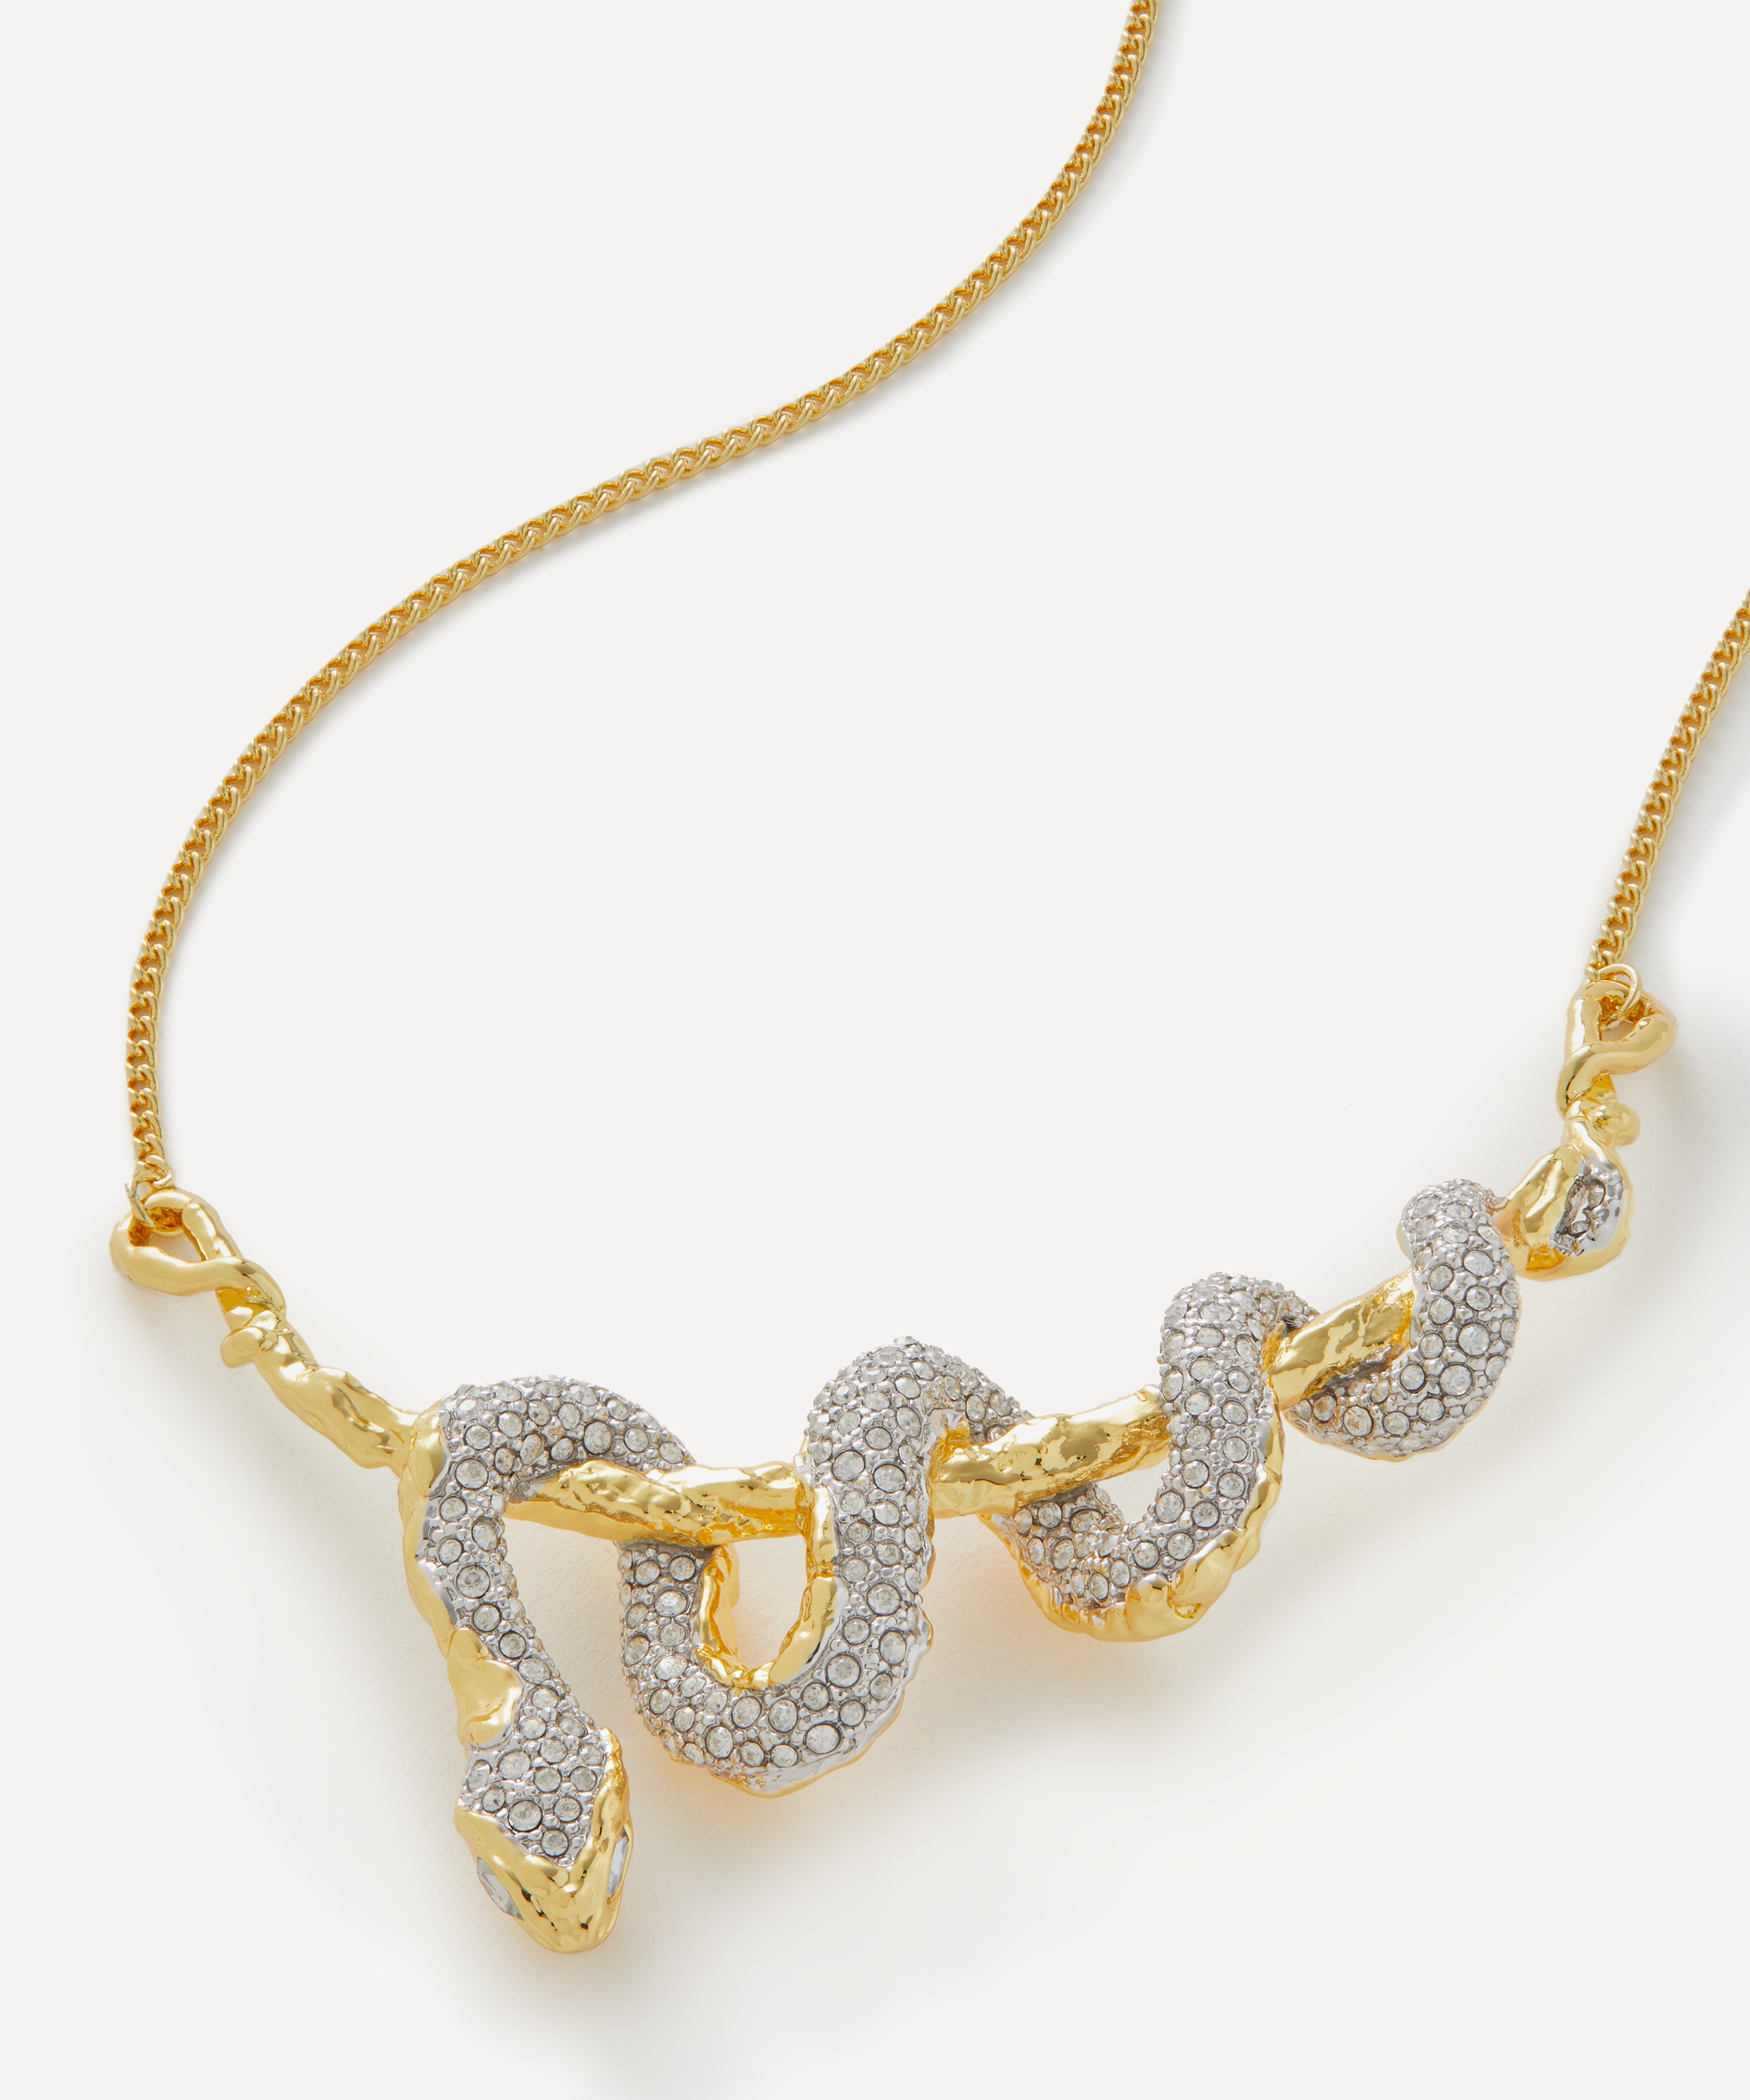 Alexis Bittar - 14ct Gold-Plated Coiled Serpent Necklace